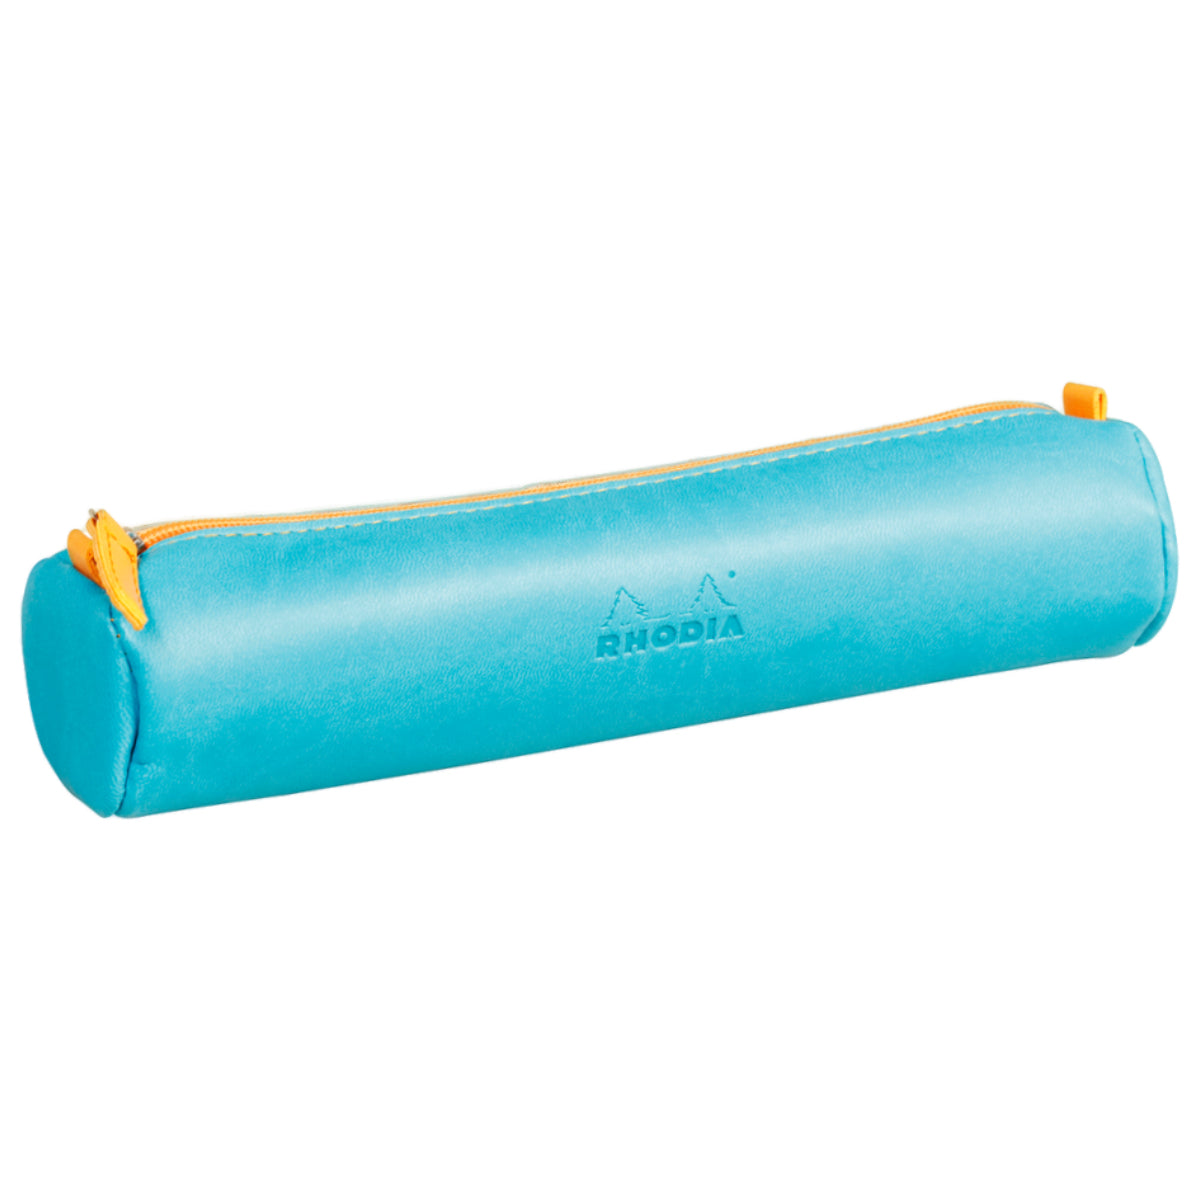 RHODIA rhodiarama Round Pencil Case with Zipper, PU Leather, 215 x 50 mm, Turquoise